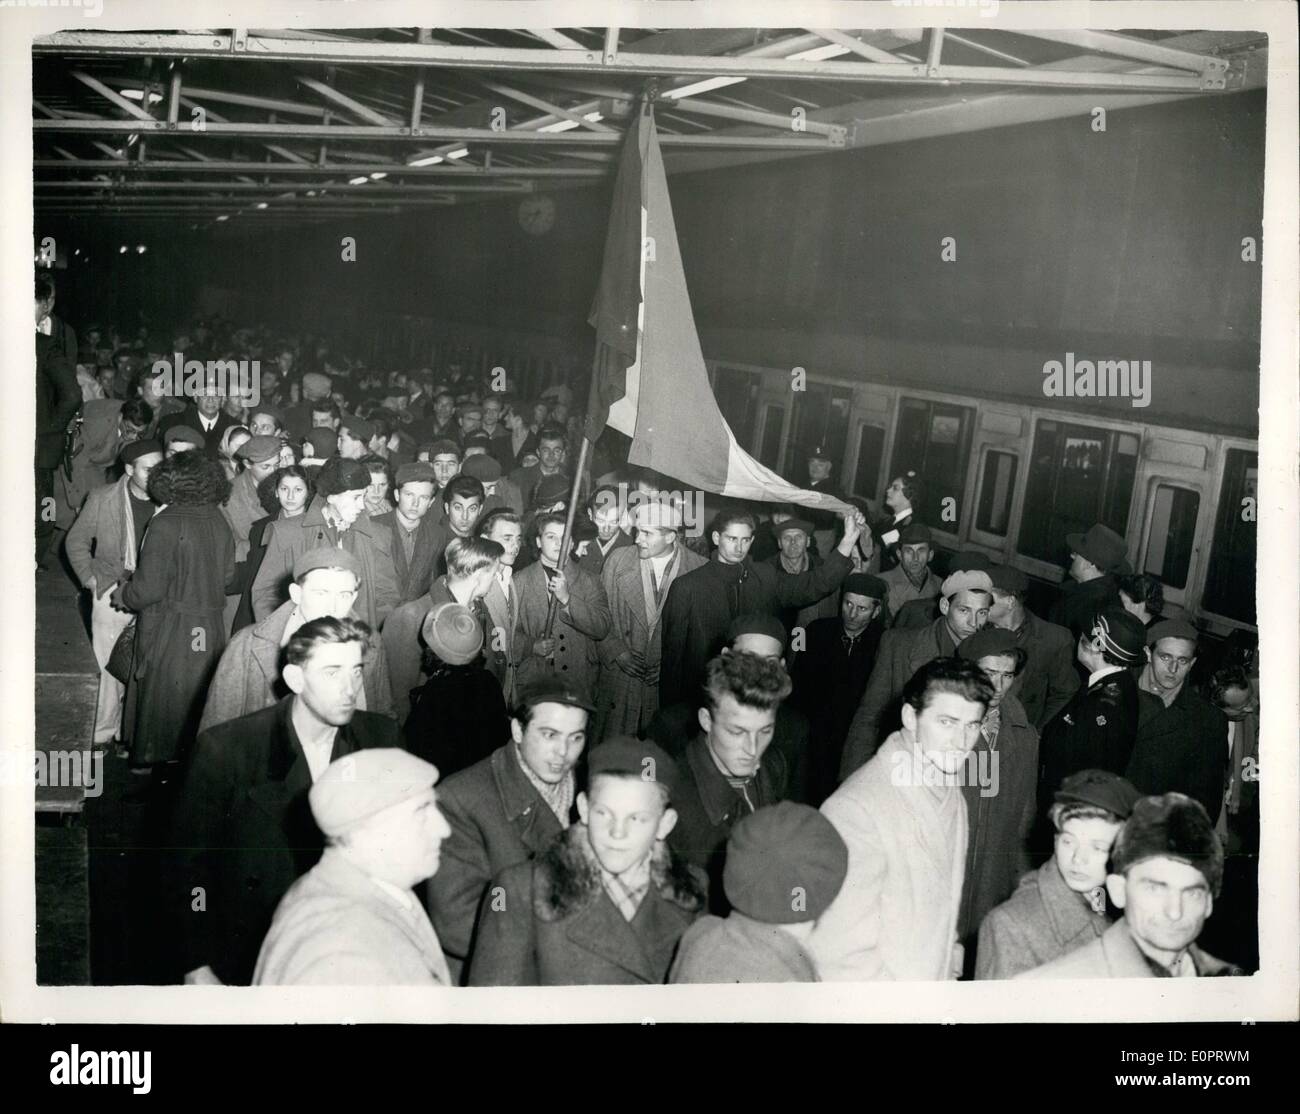 Nov. 11, 1956 - More Hungarian Refugees Arrive In London: A party of 240 refugees from Hungary, arrived by train this evening at Victoria Station. Photo Shows General view of the scene at Victoria Station on the arrival of the refugees this evening. Stock Photo